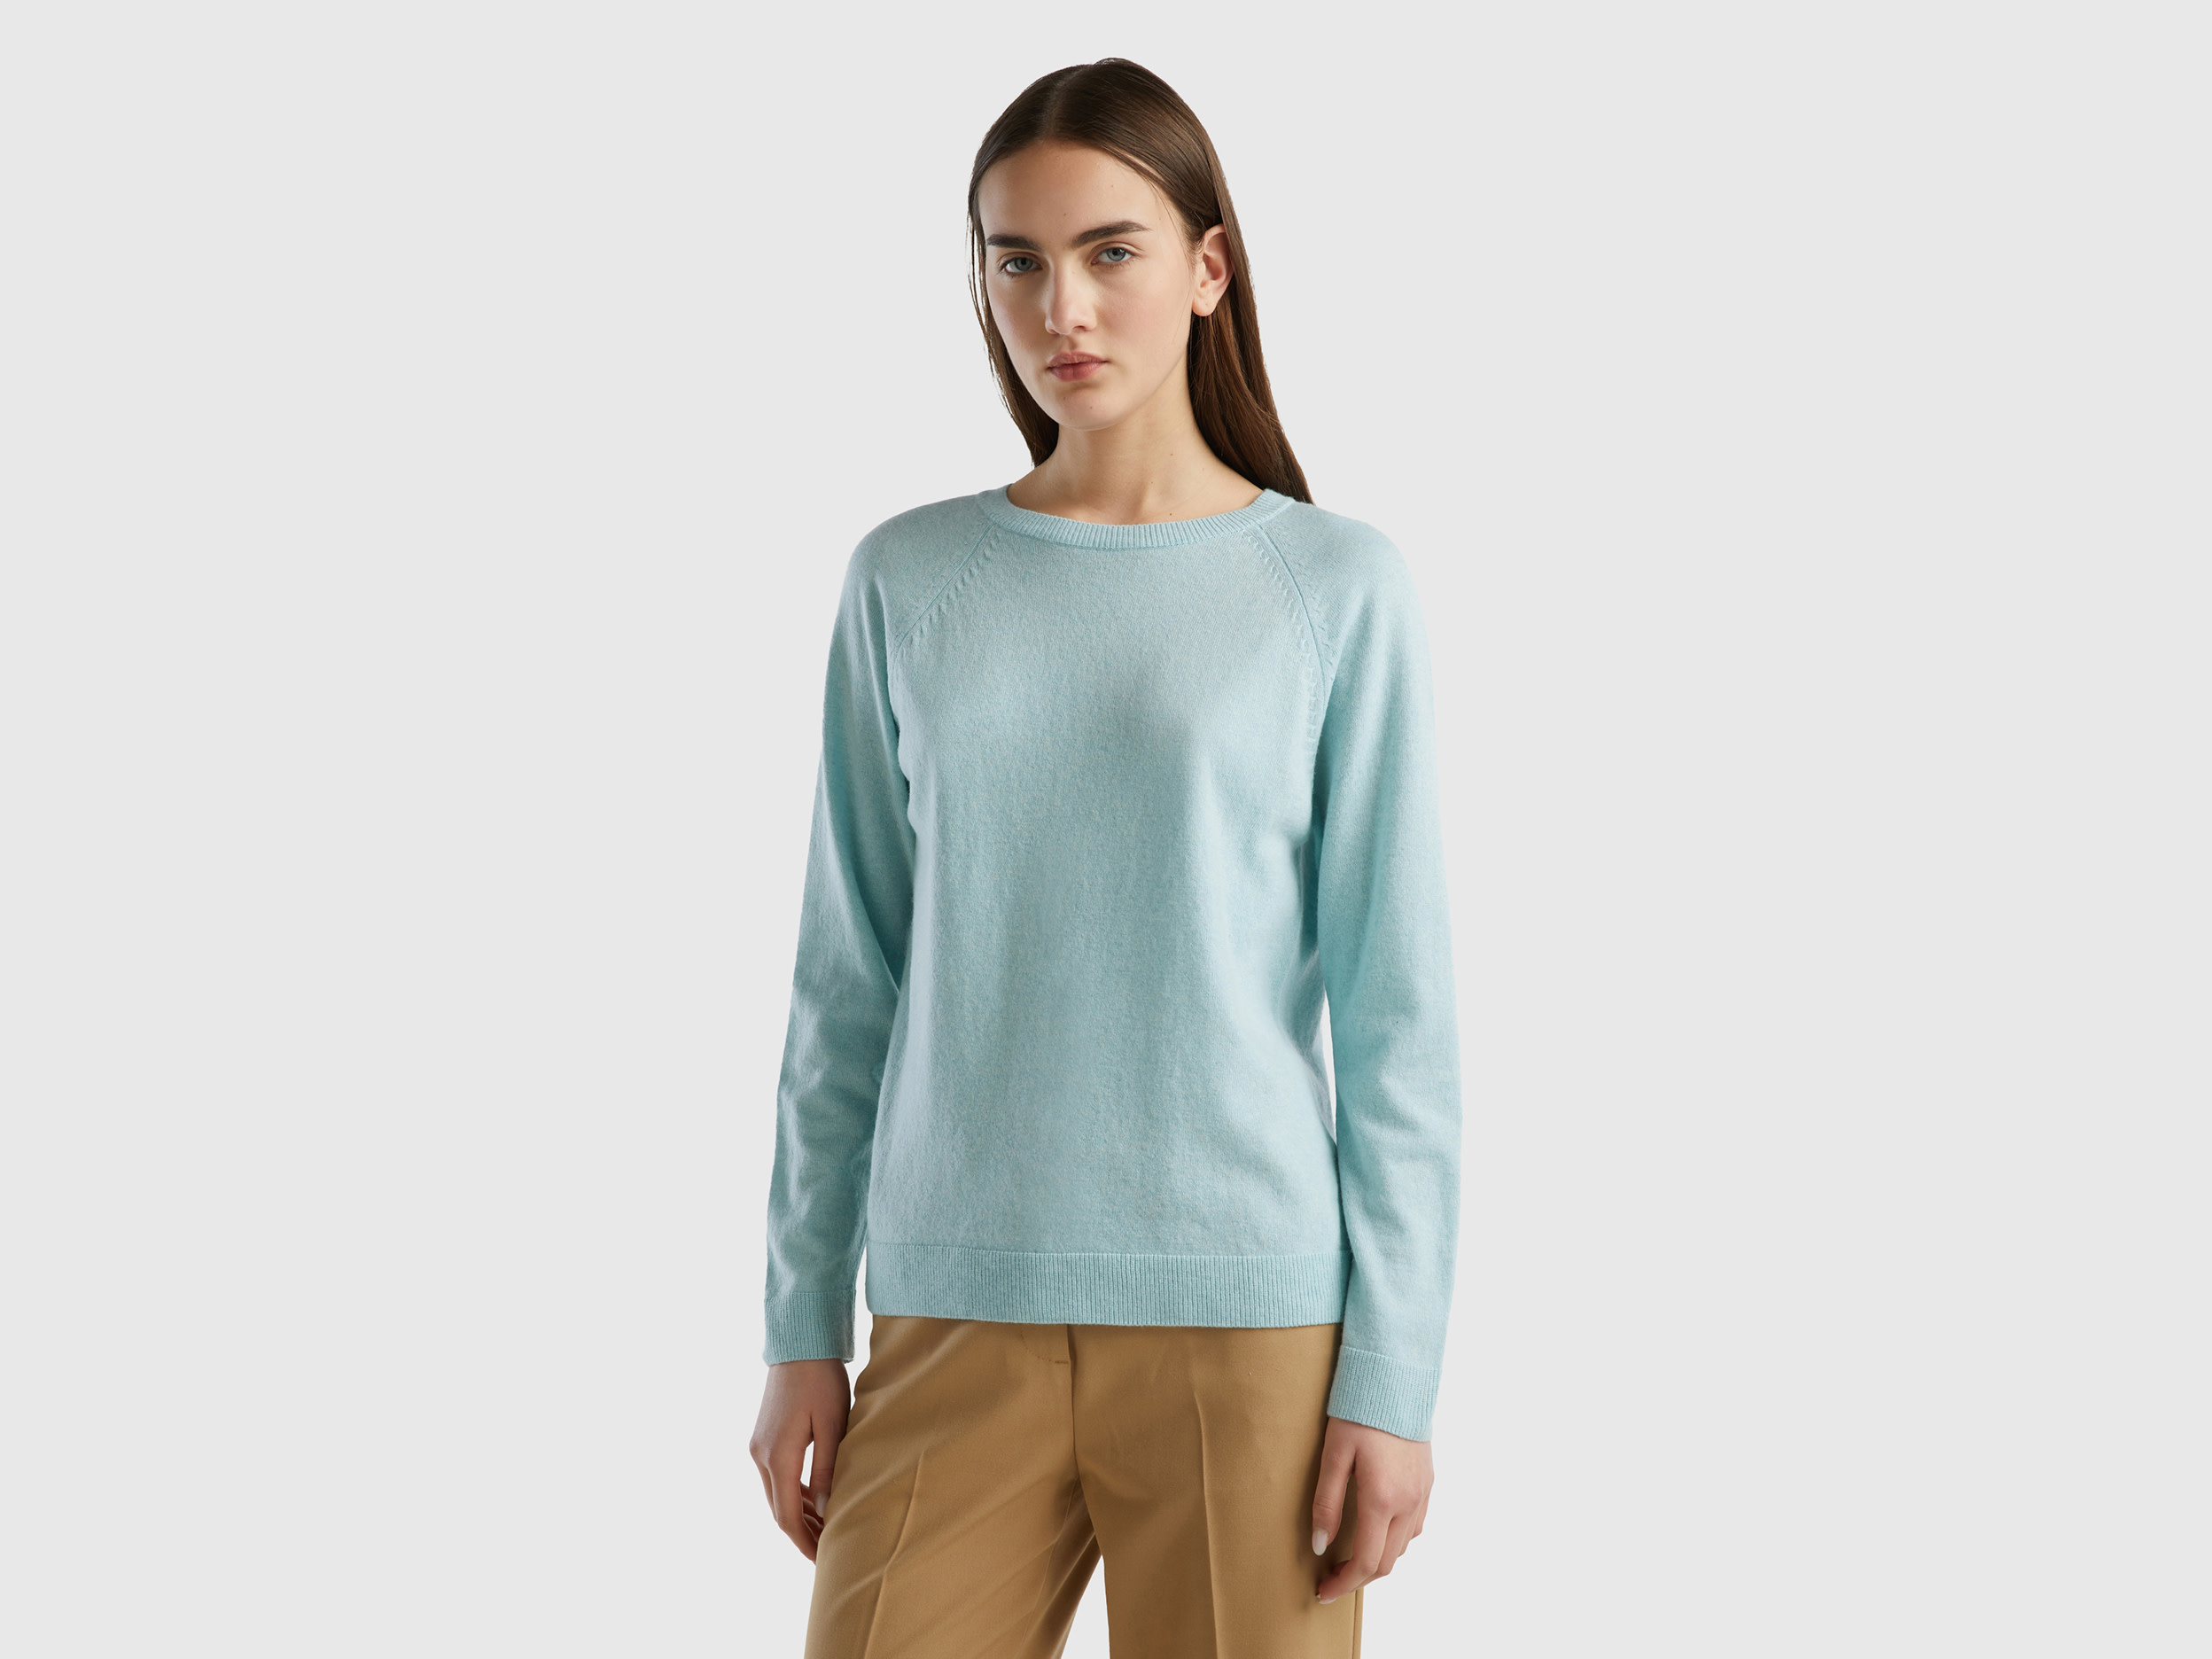 Benetton, Light Gray Crew Neck Sweater In Cashmere And Wool Blend, size S, Light Gray, Women